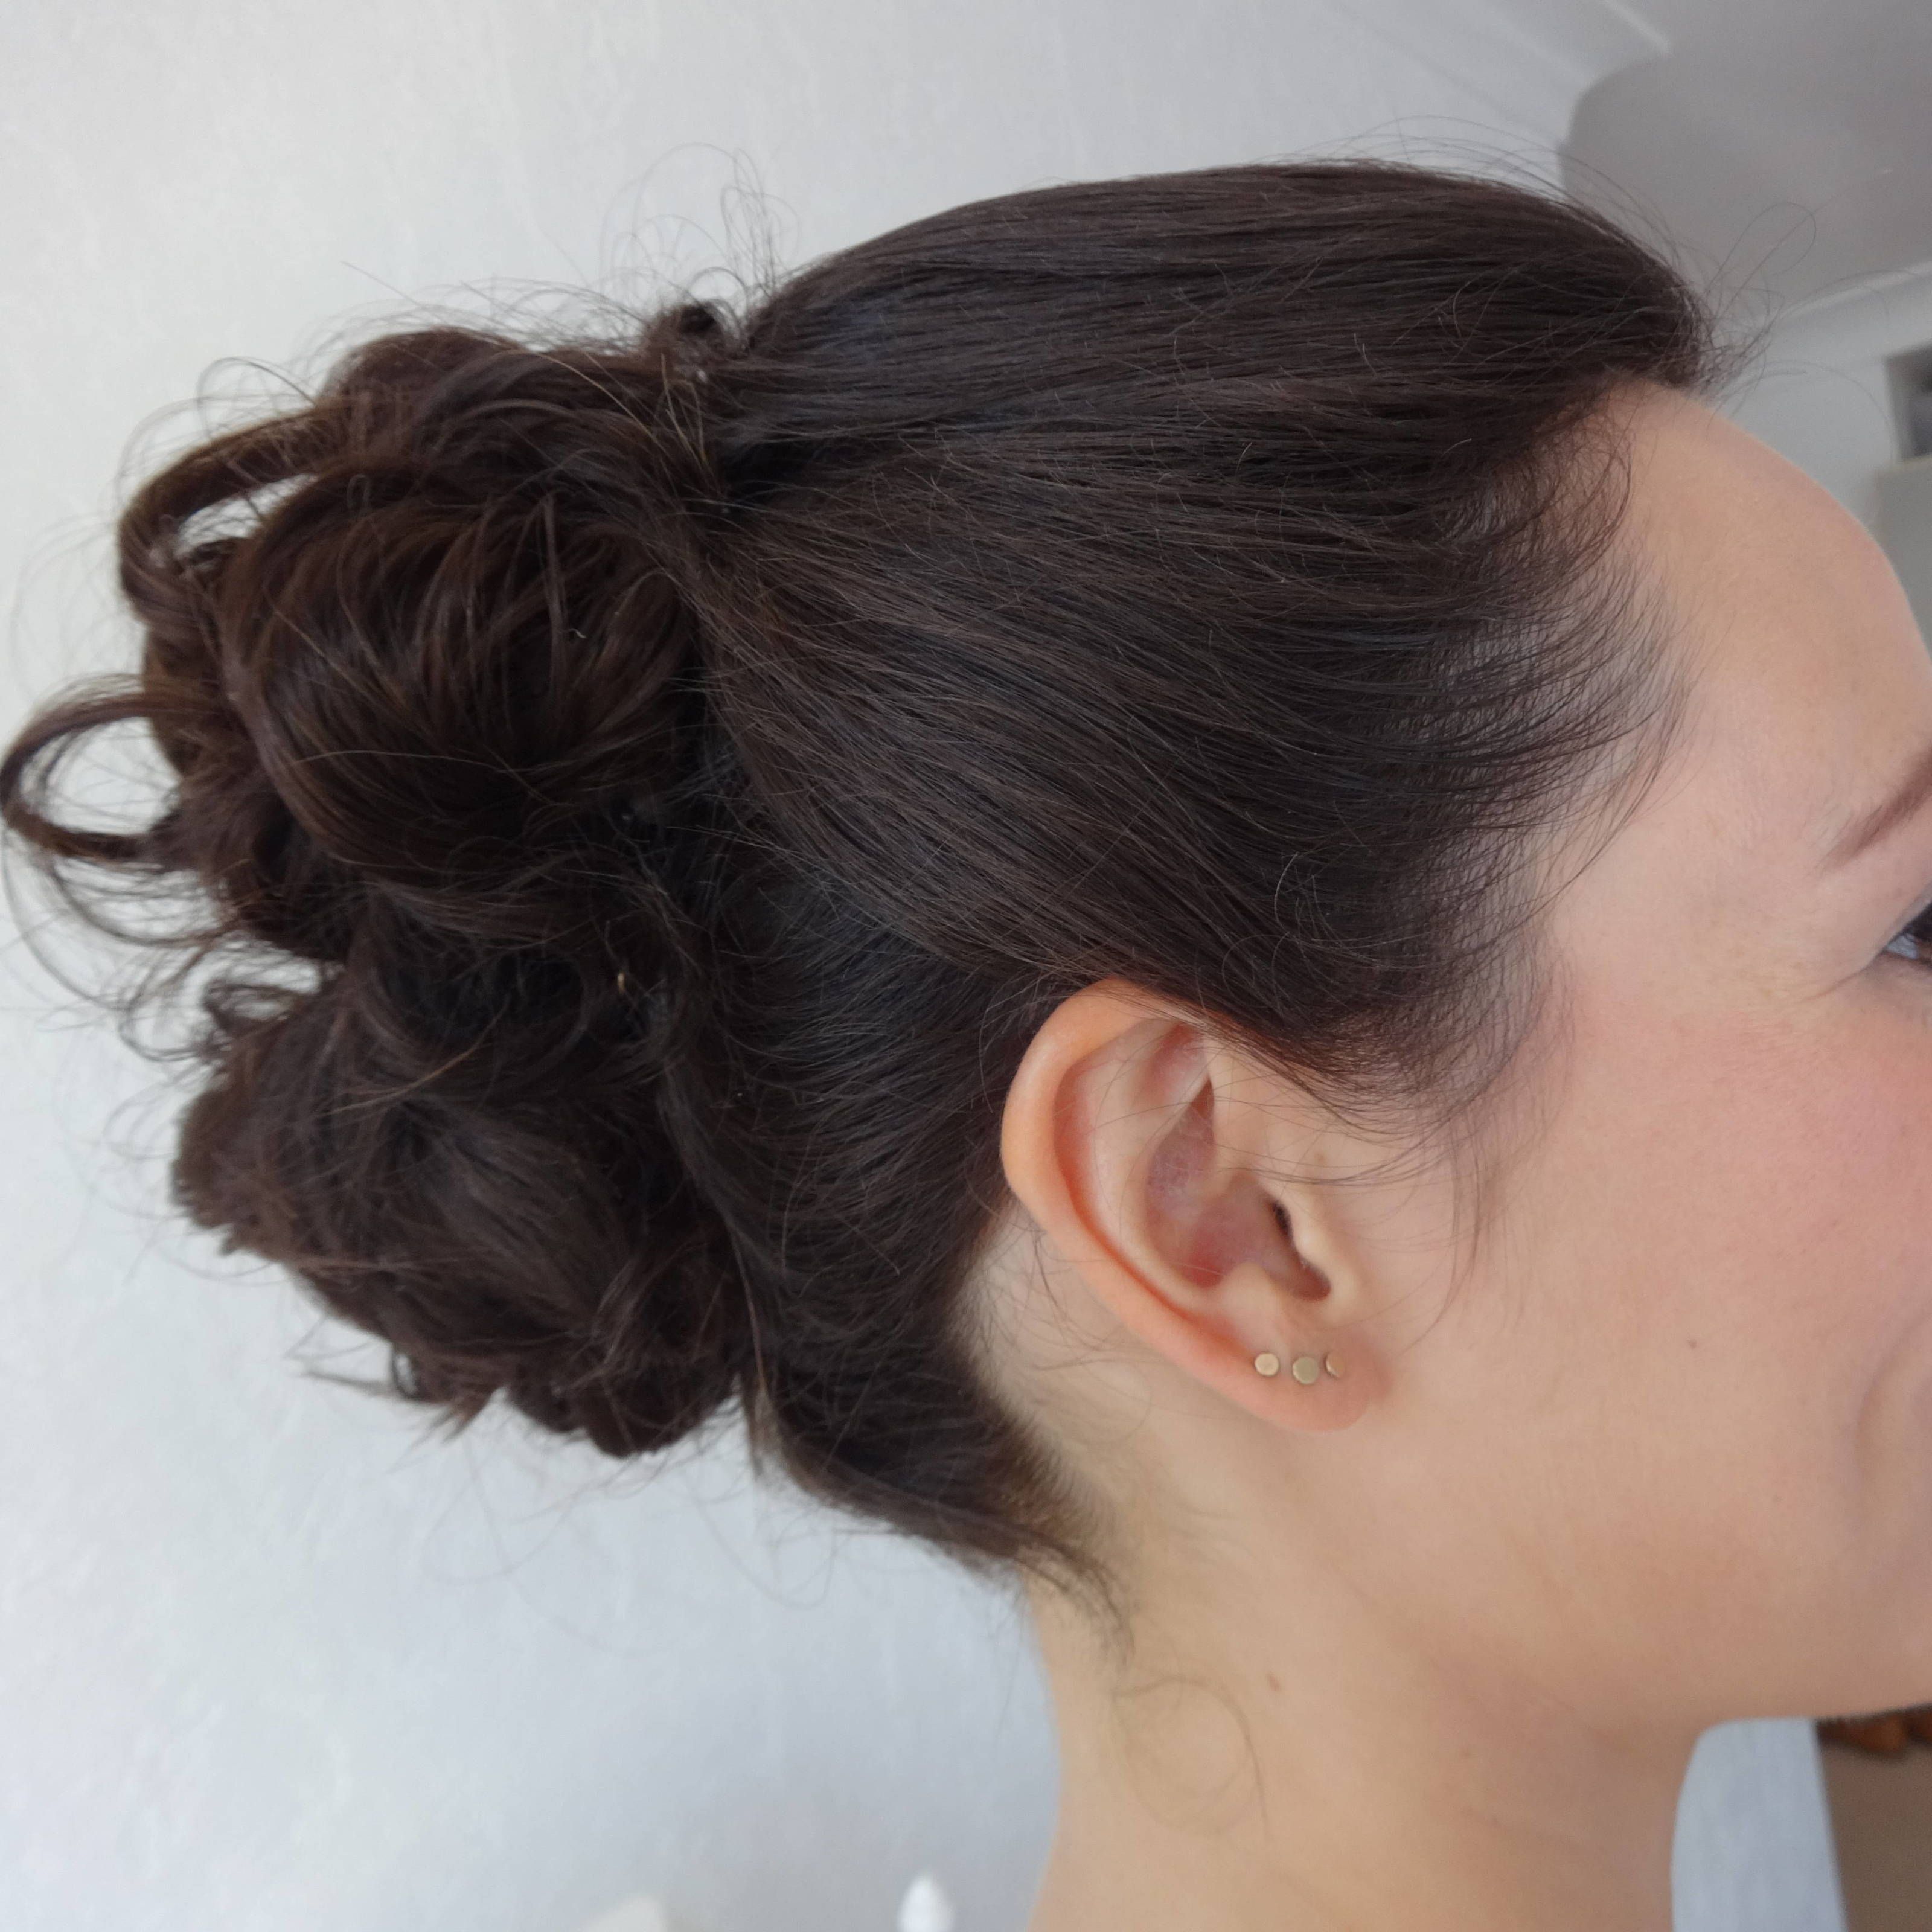 This Quick Messy Updo for Short Hair Is So Cool